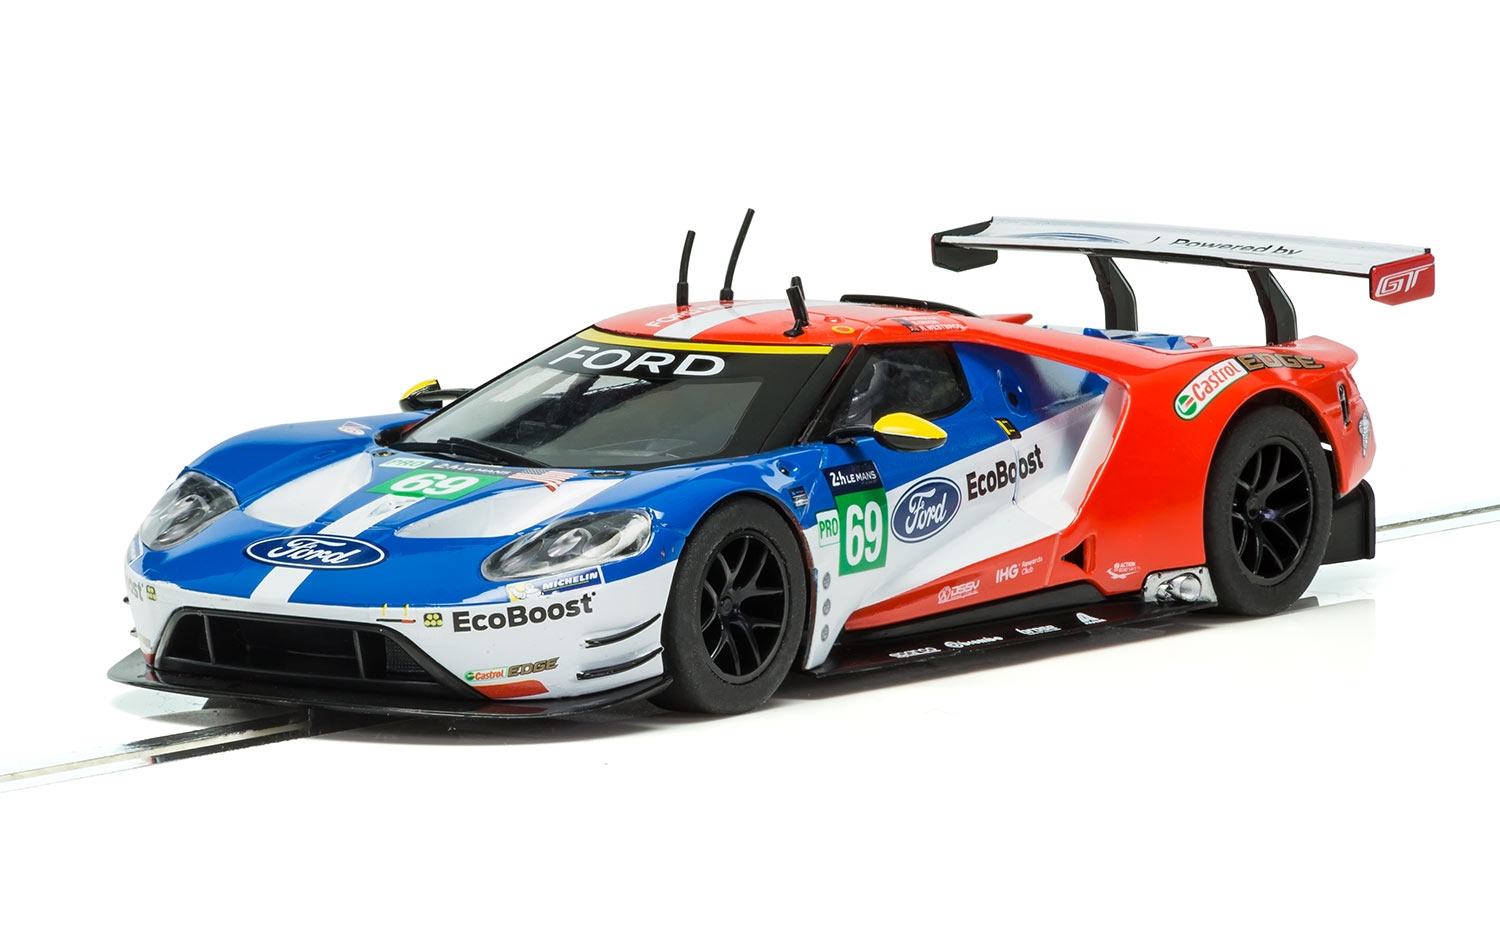 Scalextric C3858 - Ford GT LM GTE-Pro #69 - '16 Le Mans 3rd Place